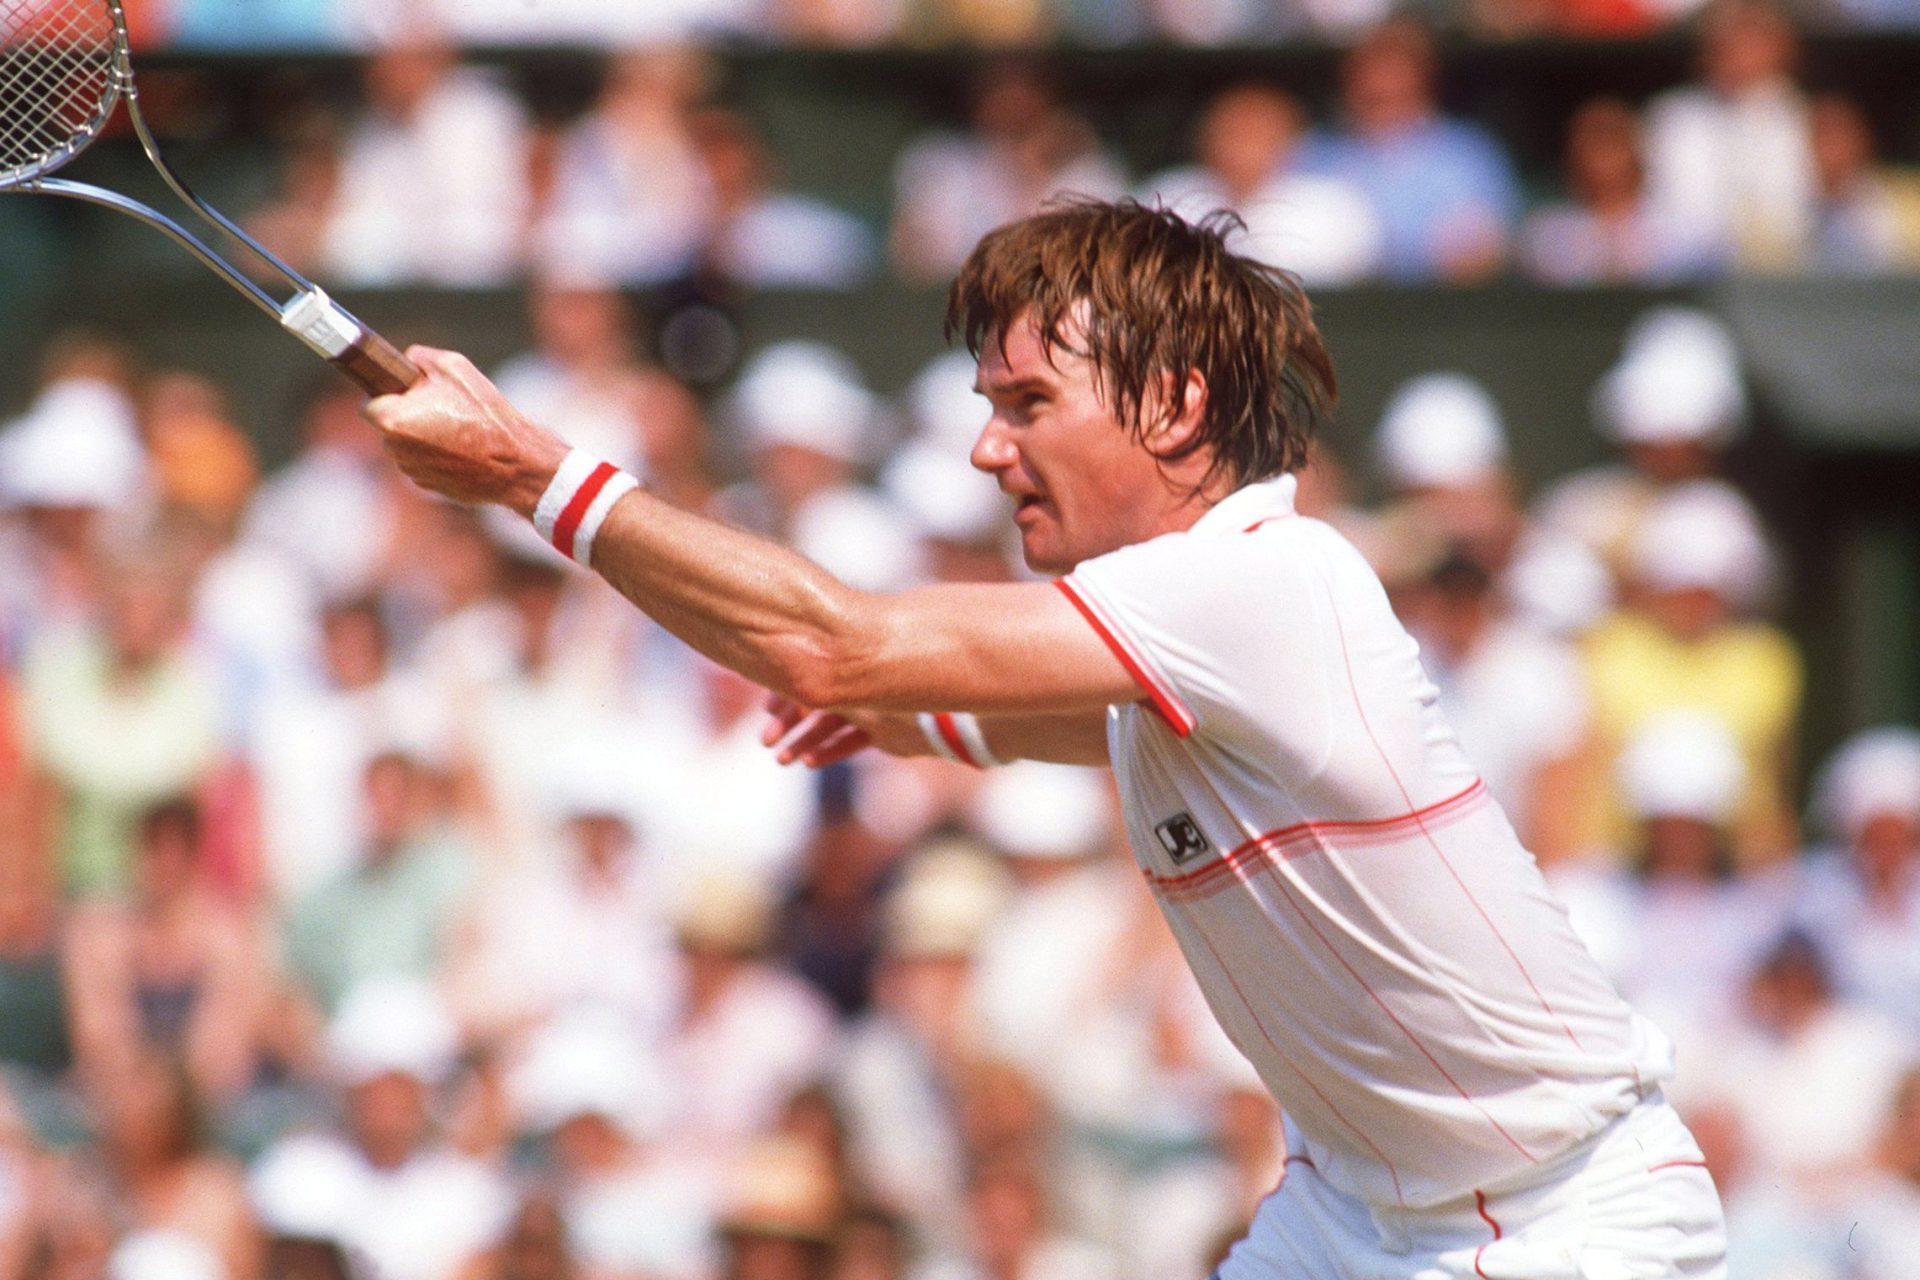 Jimmy Connors: The two-time Wimbledon champion in pictures